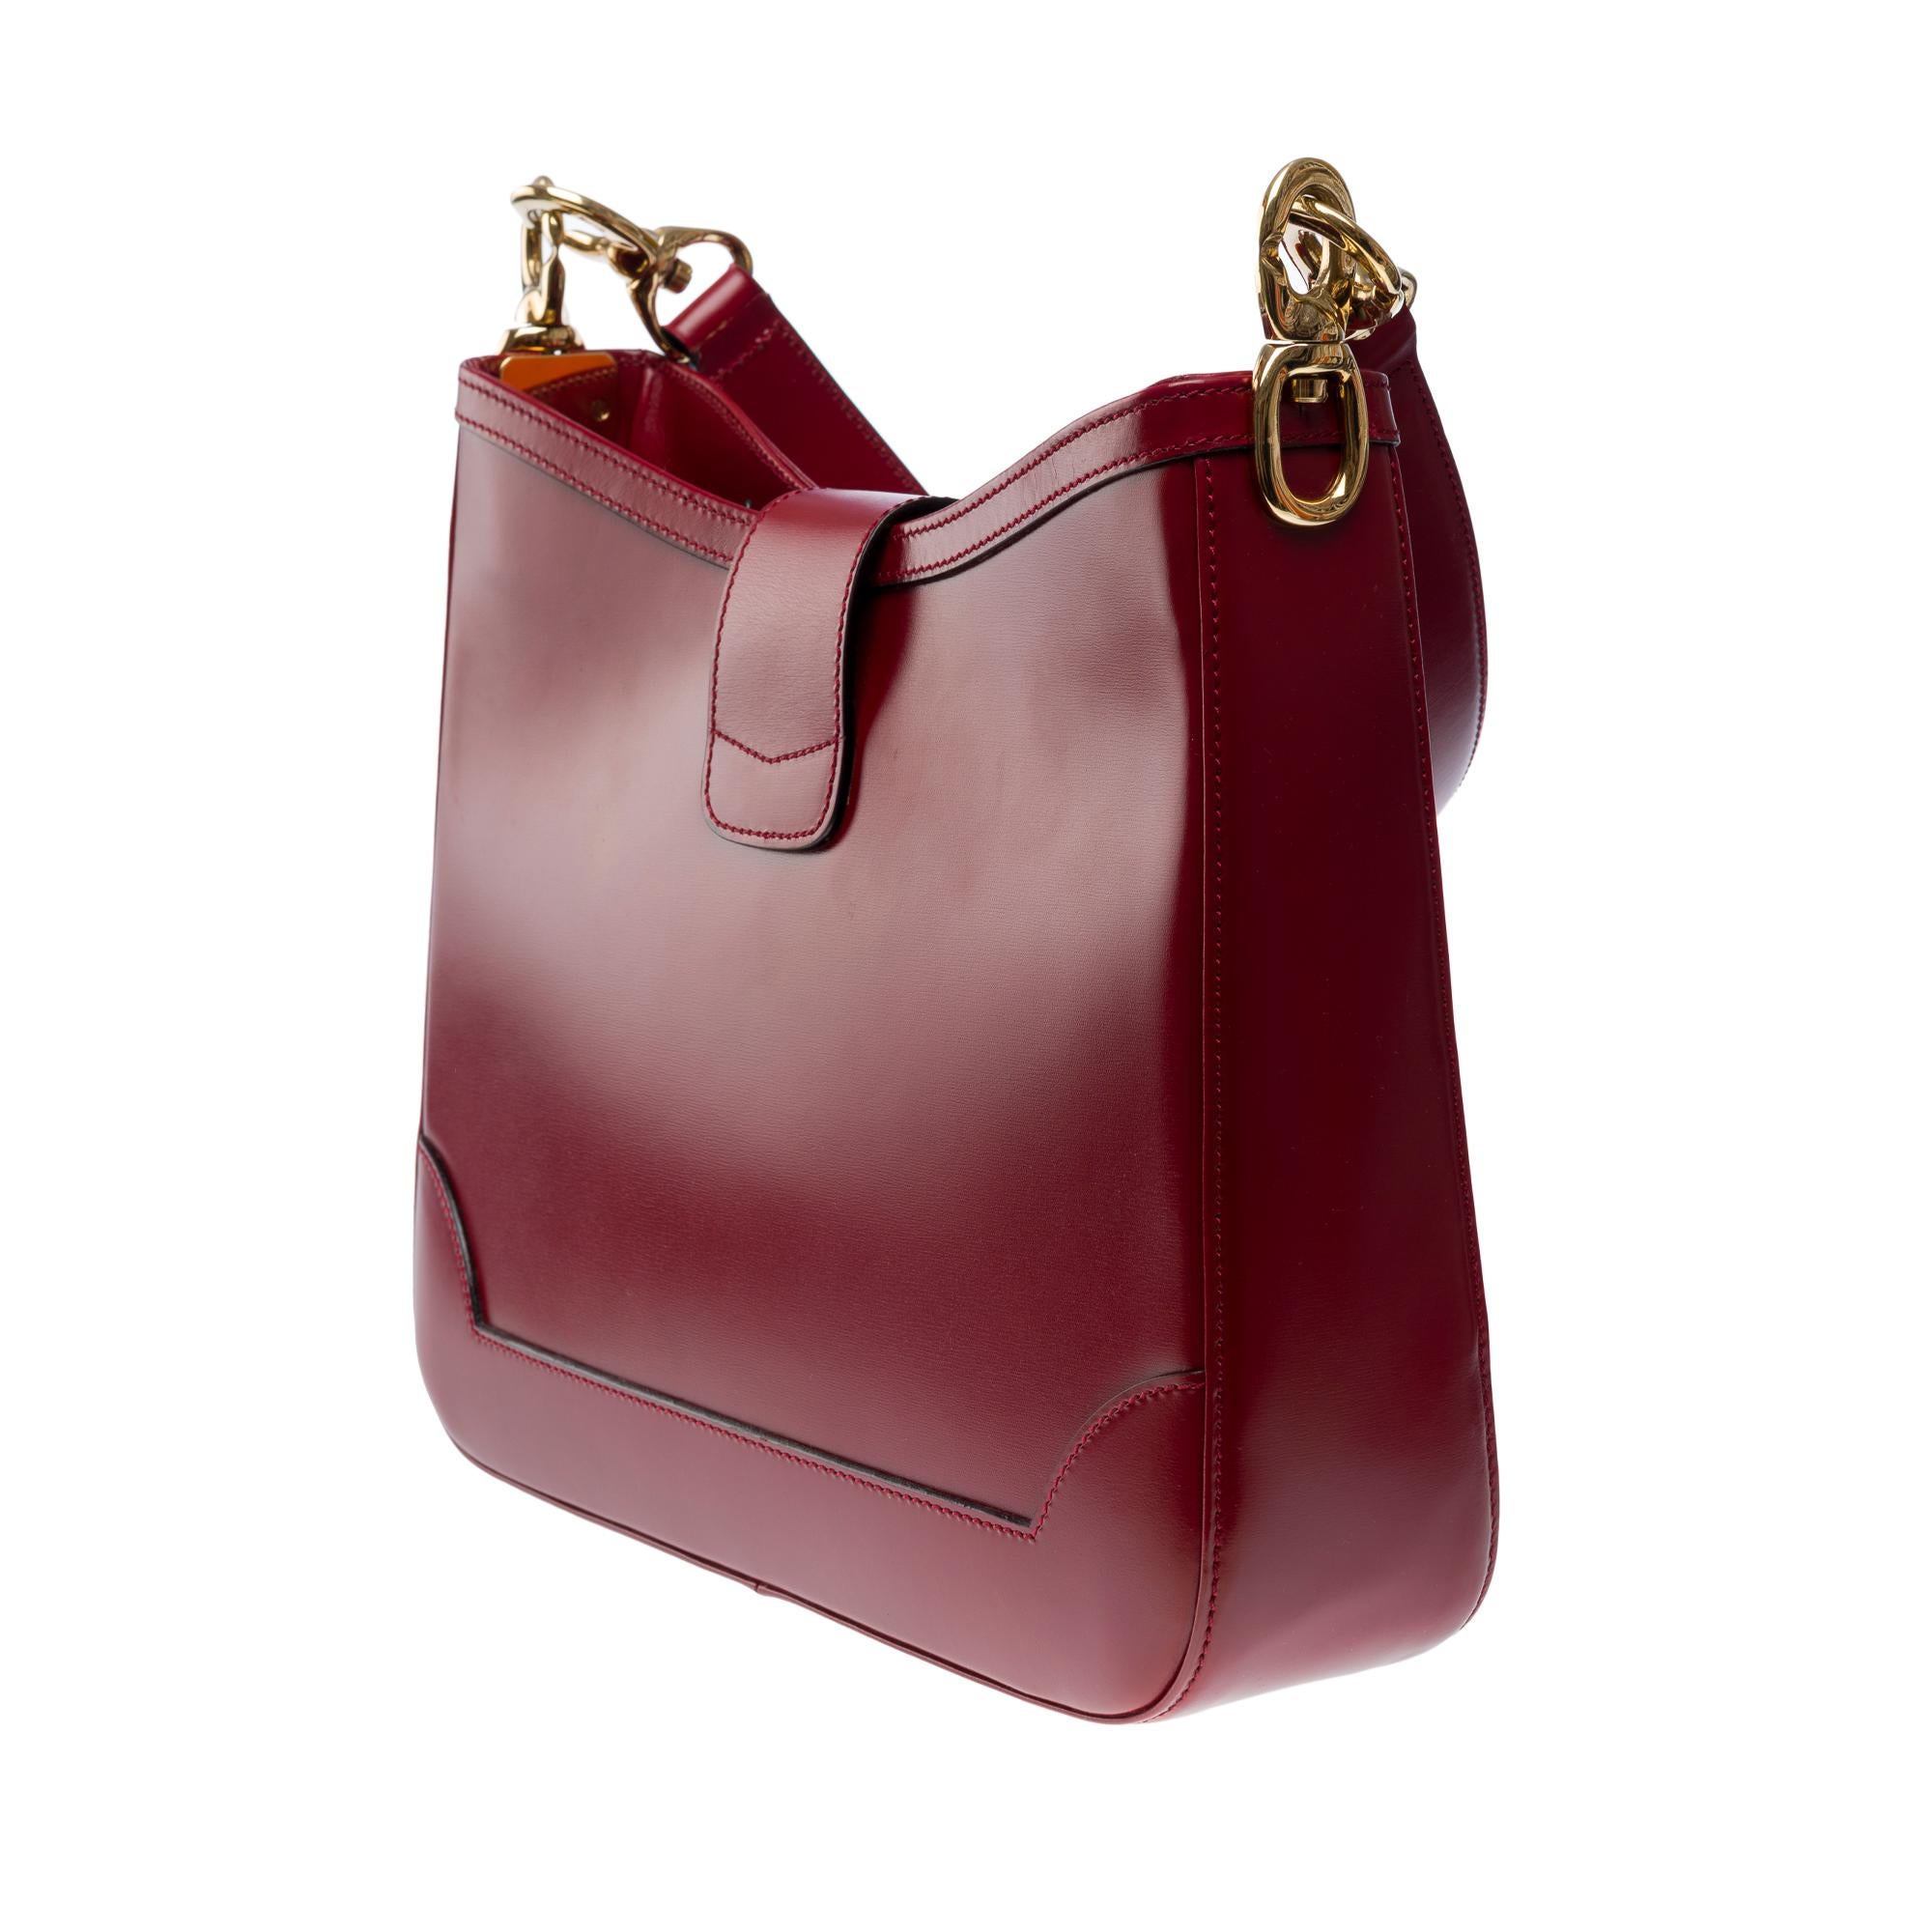 Gorgeous Celine vintage Tote bag in red cherry box calf, GHW 1